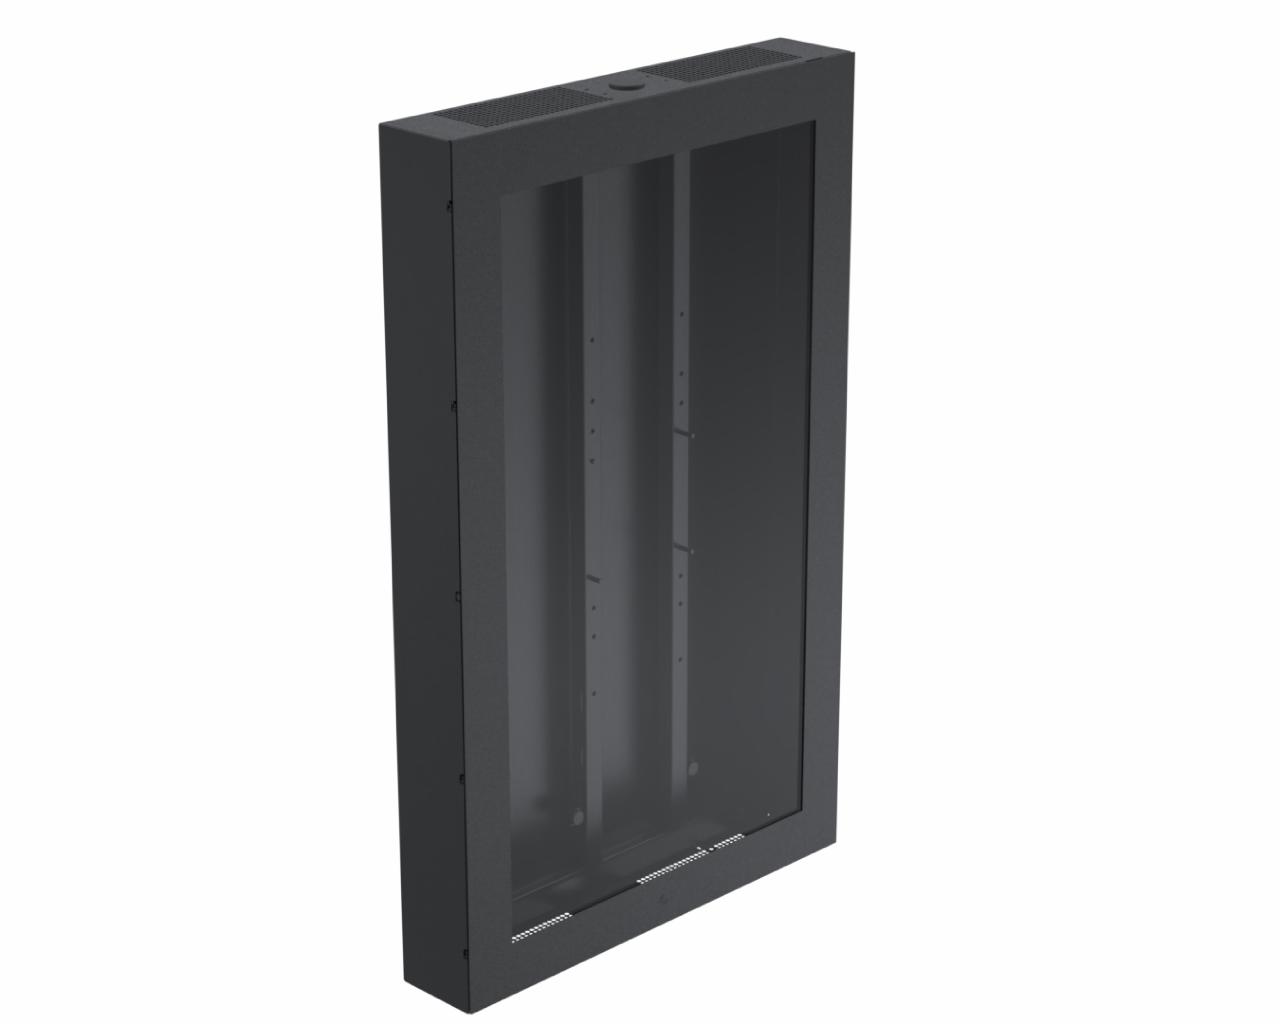 SpacePole Universal Enclosure for 55” displays – Single sided